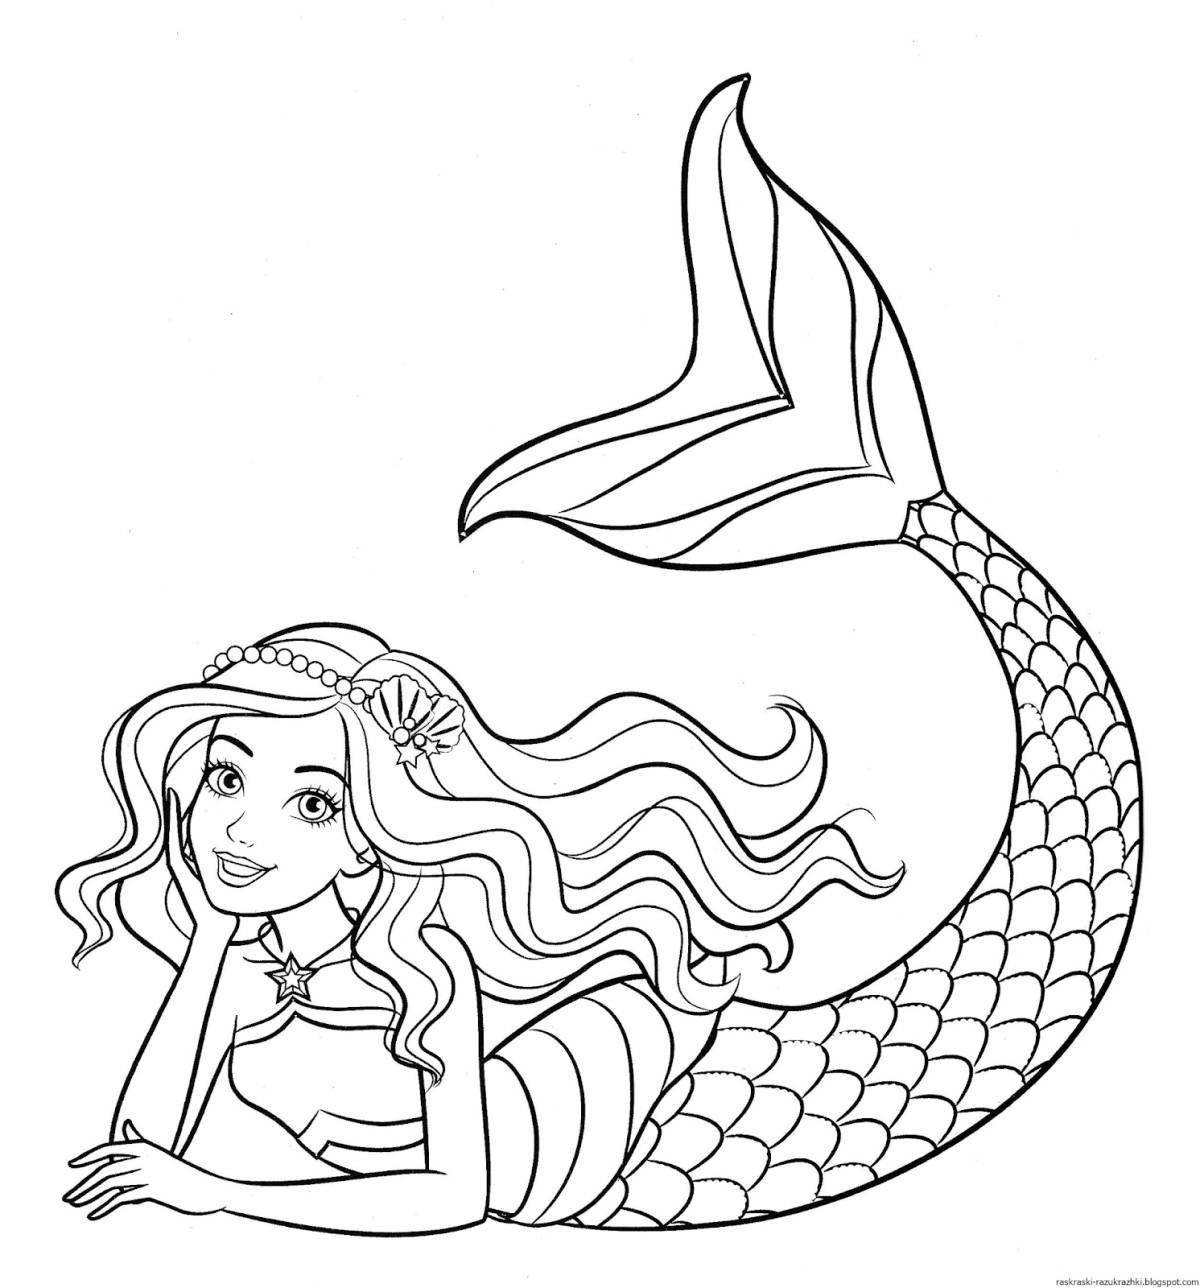 Shiny mermaid coloring by numbers